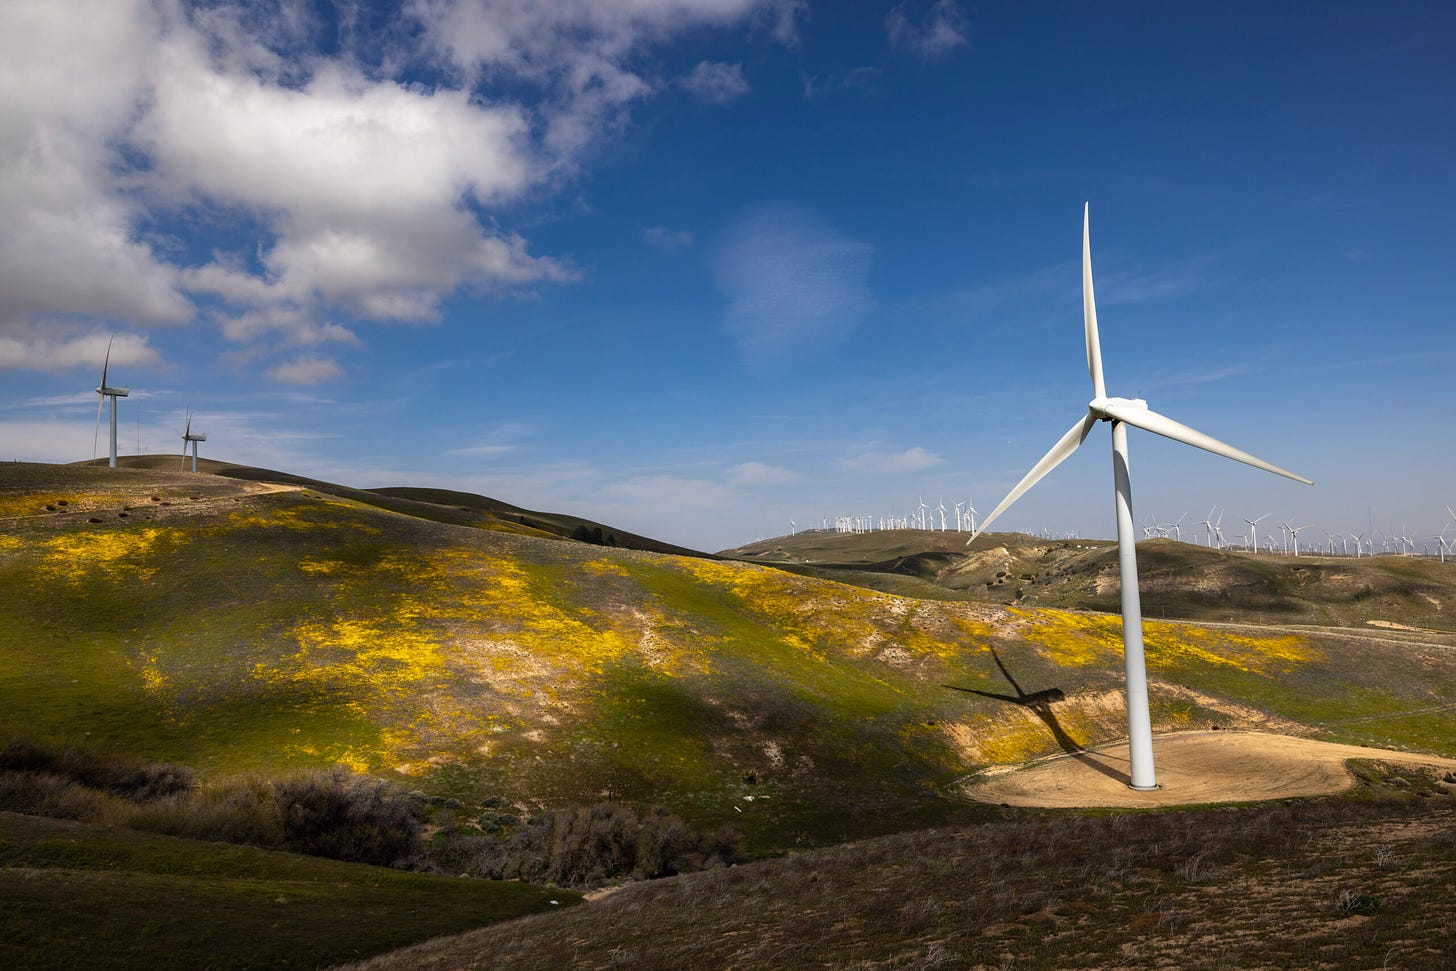 Wildflowers spread over hills as wind turbines create electricity on April 16, 2023 near Cameron, California. Spectacular wildflower blooms, referred to by some as a "superbloom", is occurring across much of California following a historically wet season that drove 31 atmospheric river storms thorough the region, resulting in widespread flooding and record snow depths in the Sierra Nevada Mountains.